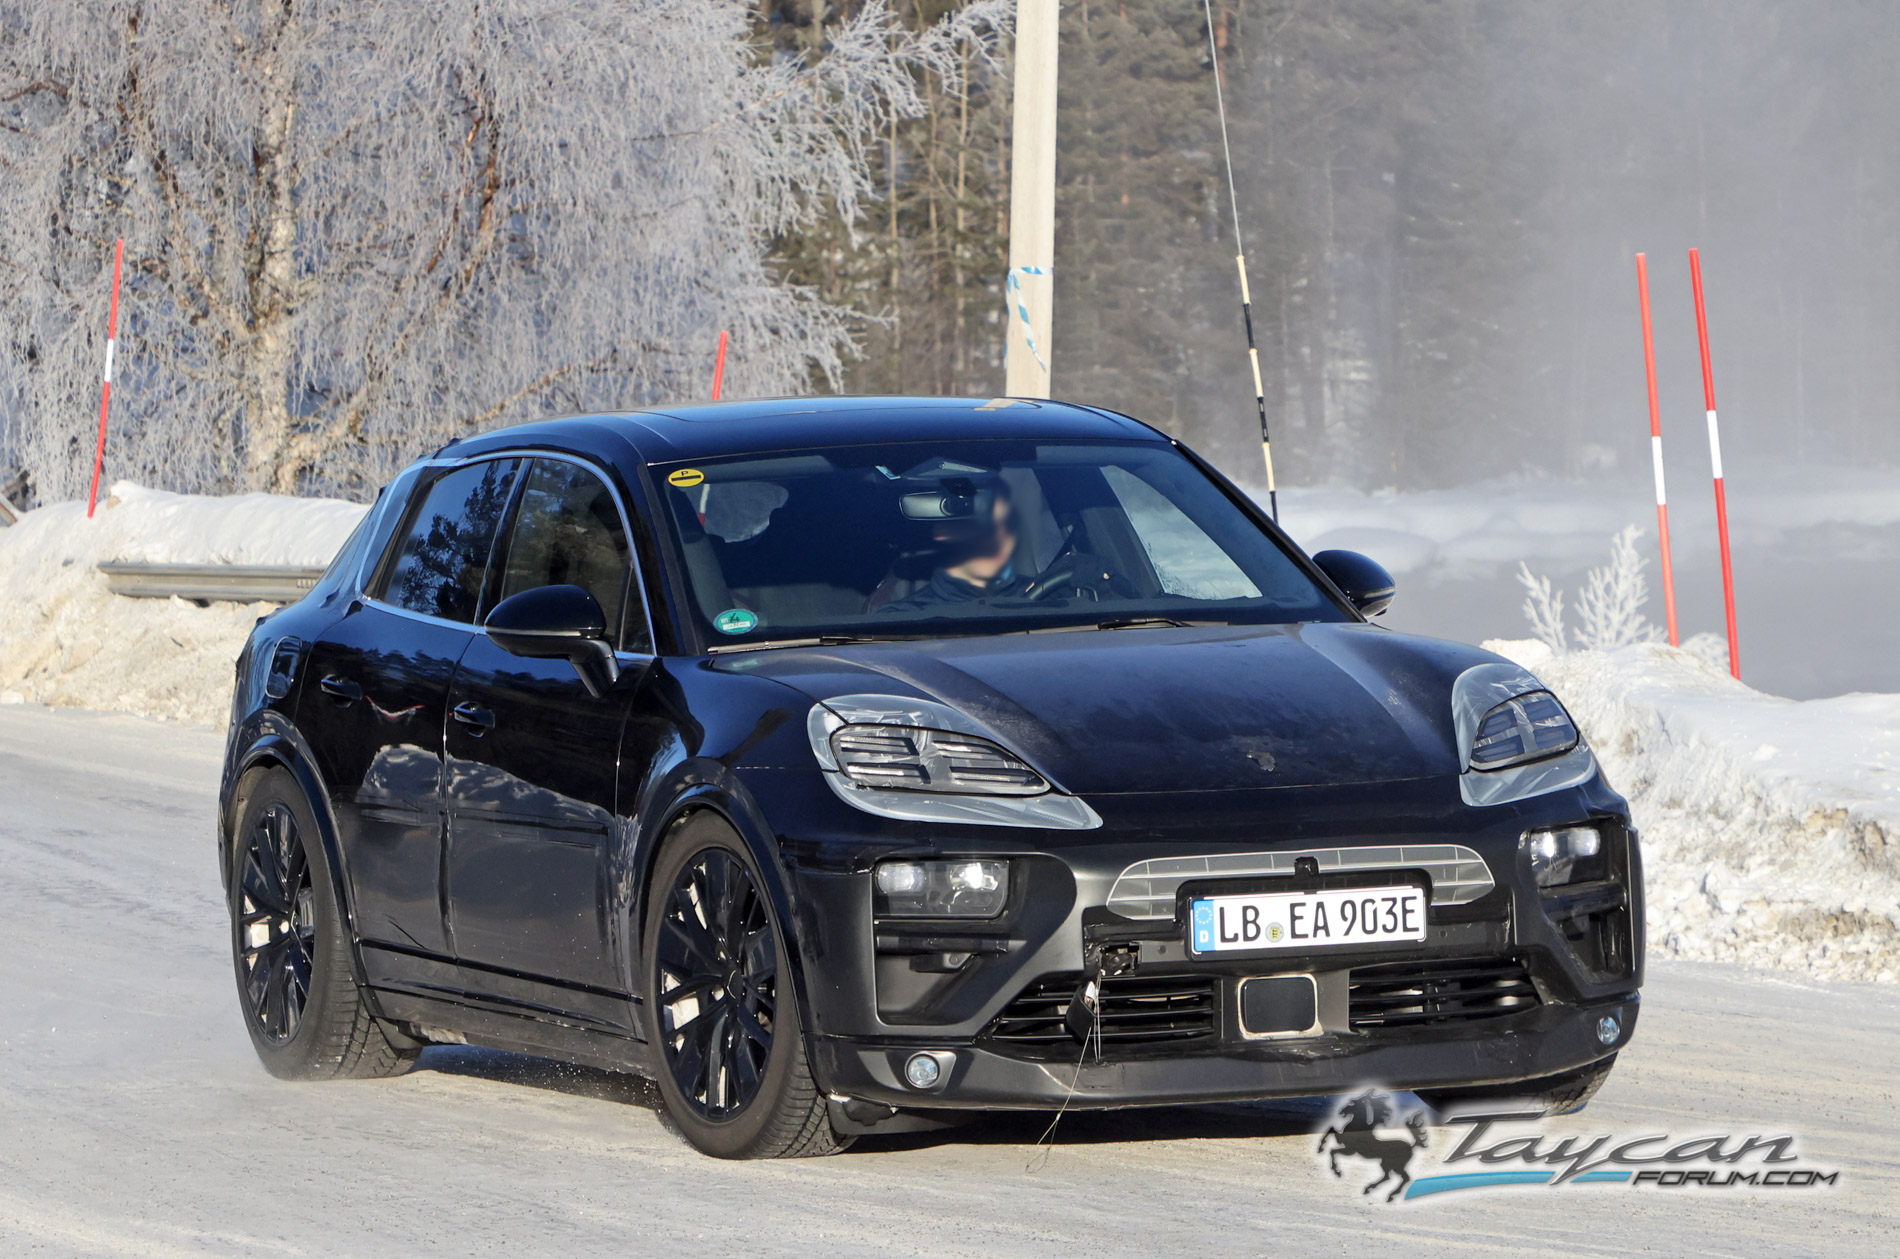 Macan EV Macan EV Interior Spied Uncovered! + Latest Cold Climate Testing Photos Porsche Macan 10